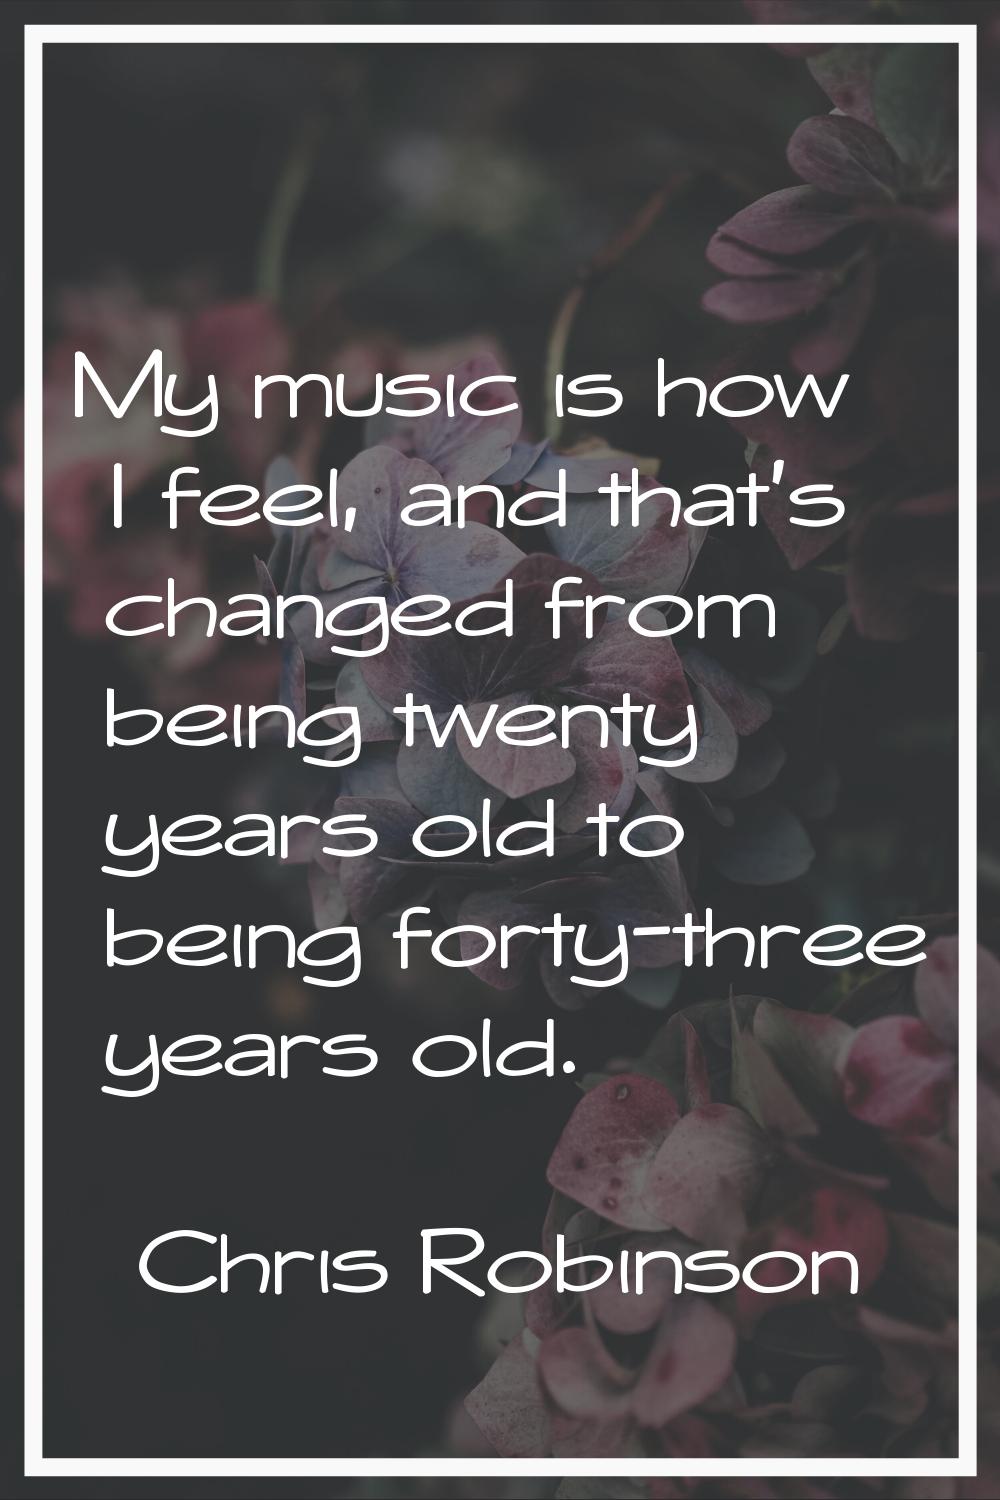 My music is how I feel, and that's changed from being twenty years old to being forty-three years o